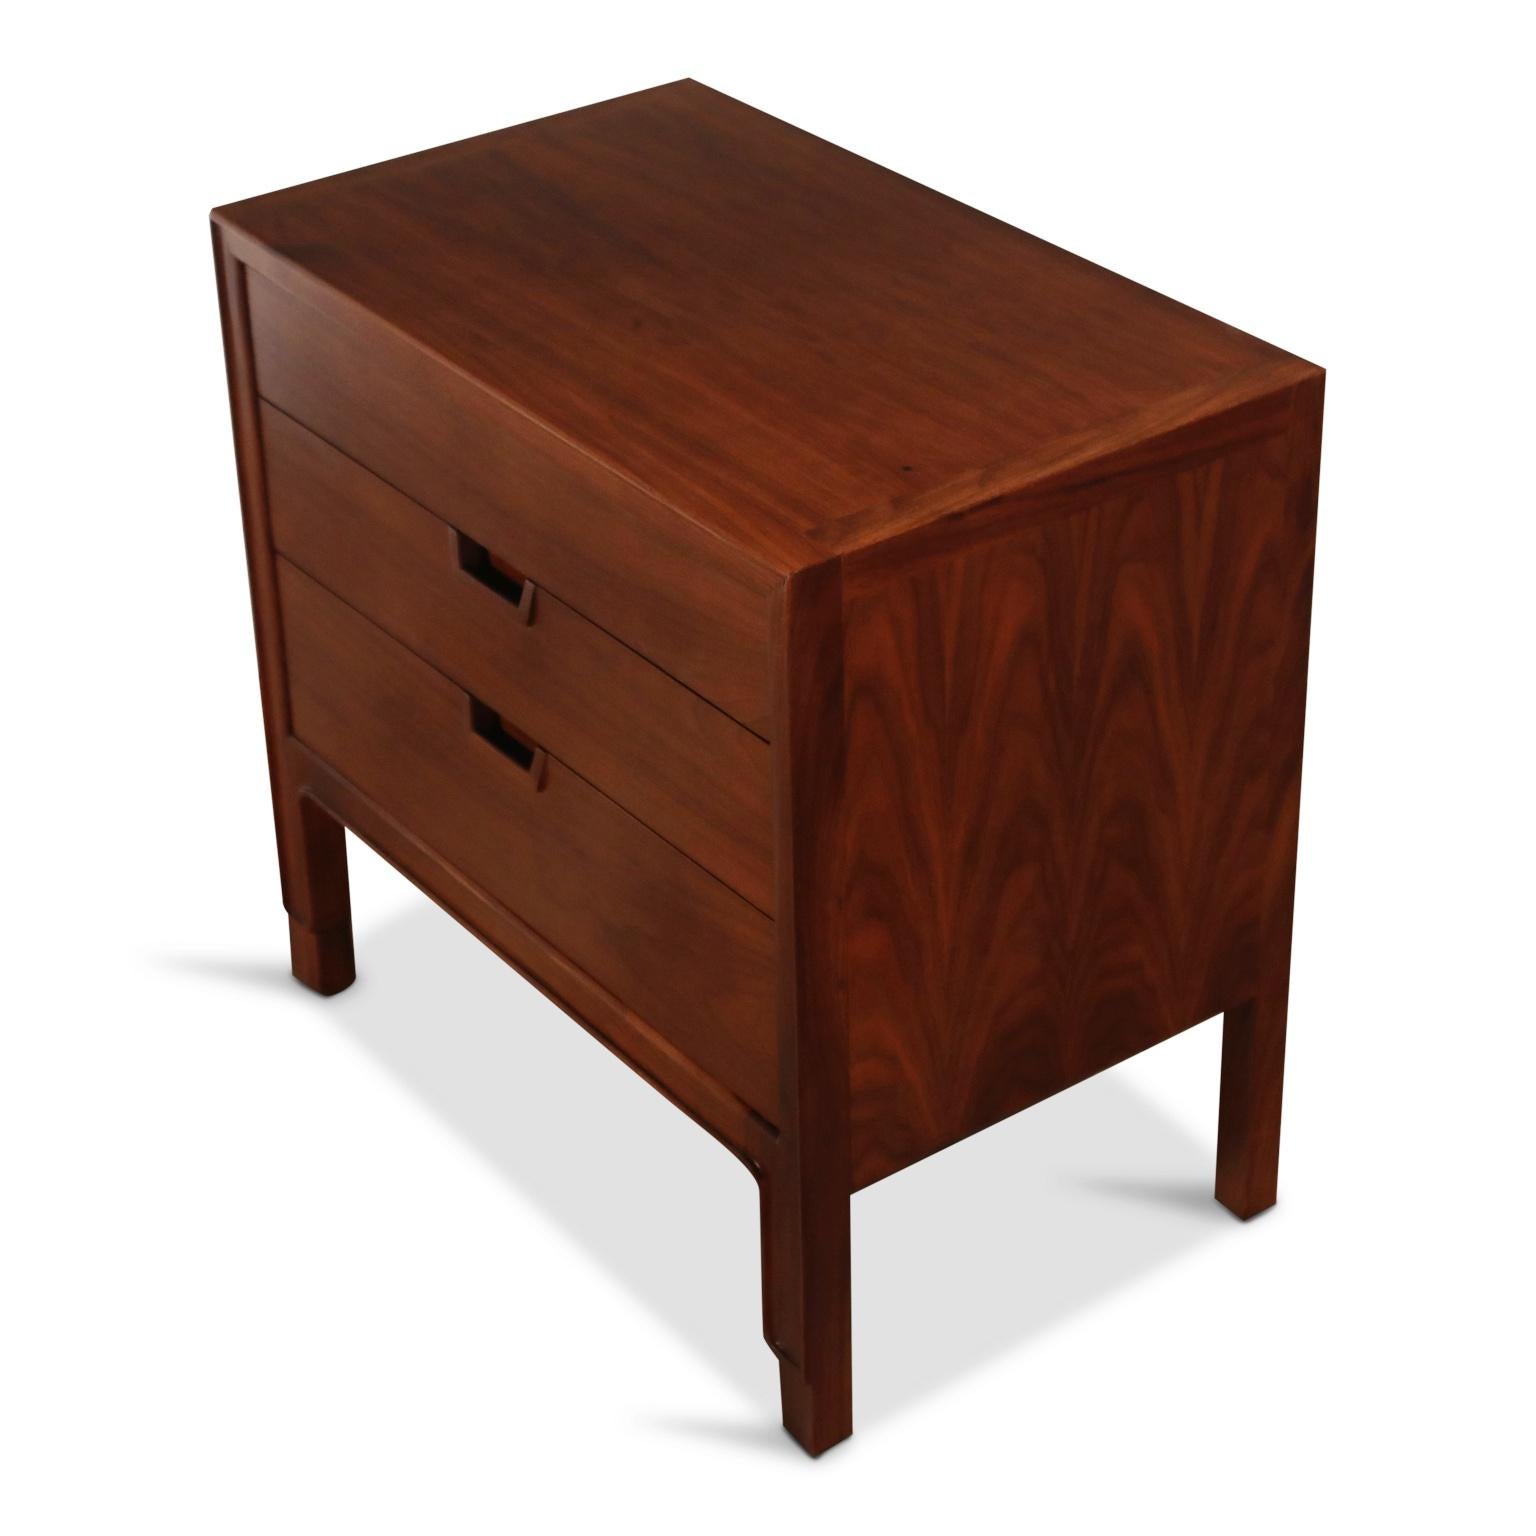 American Pair of Refinished Nightstands or End Tables by John Stuart for Janus Collection